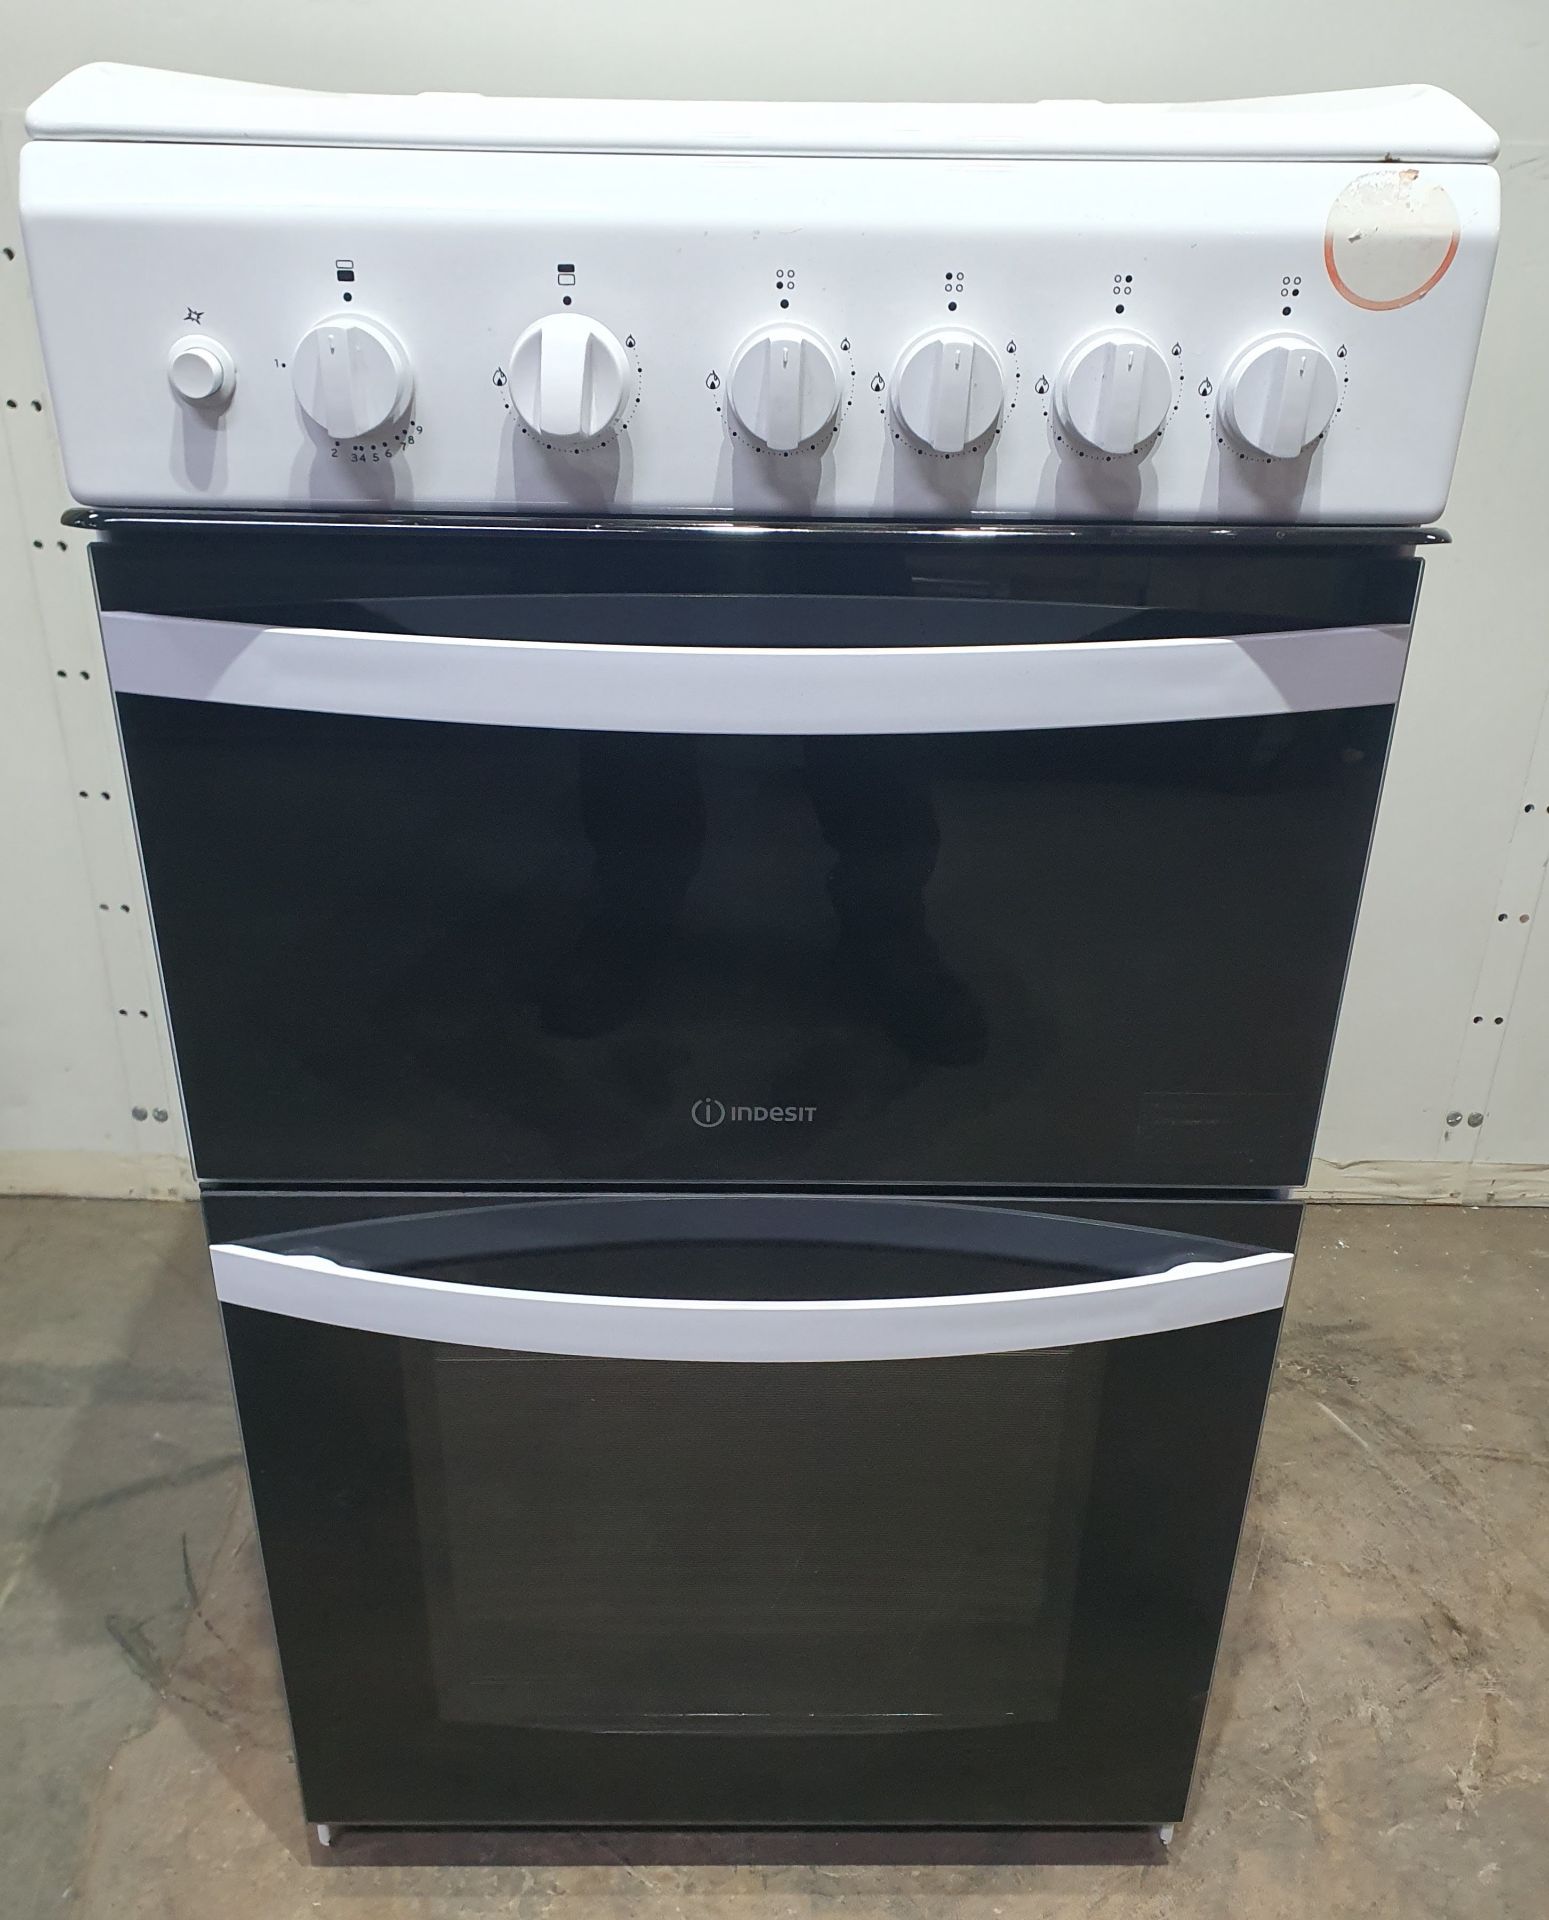 Ex-Display Indesit ID5G00KCW Gas Double Oven, 50cm - White